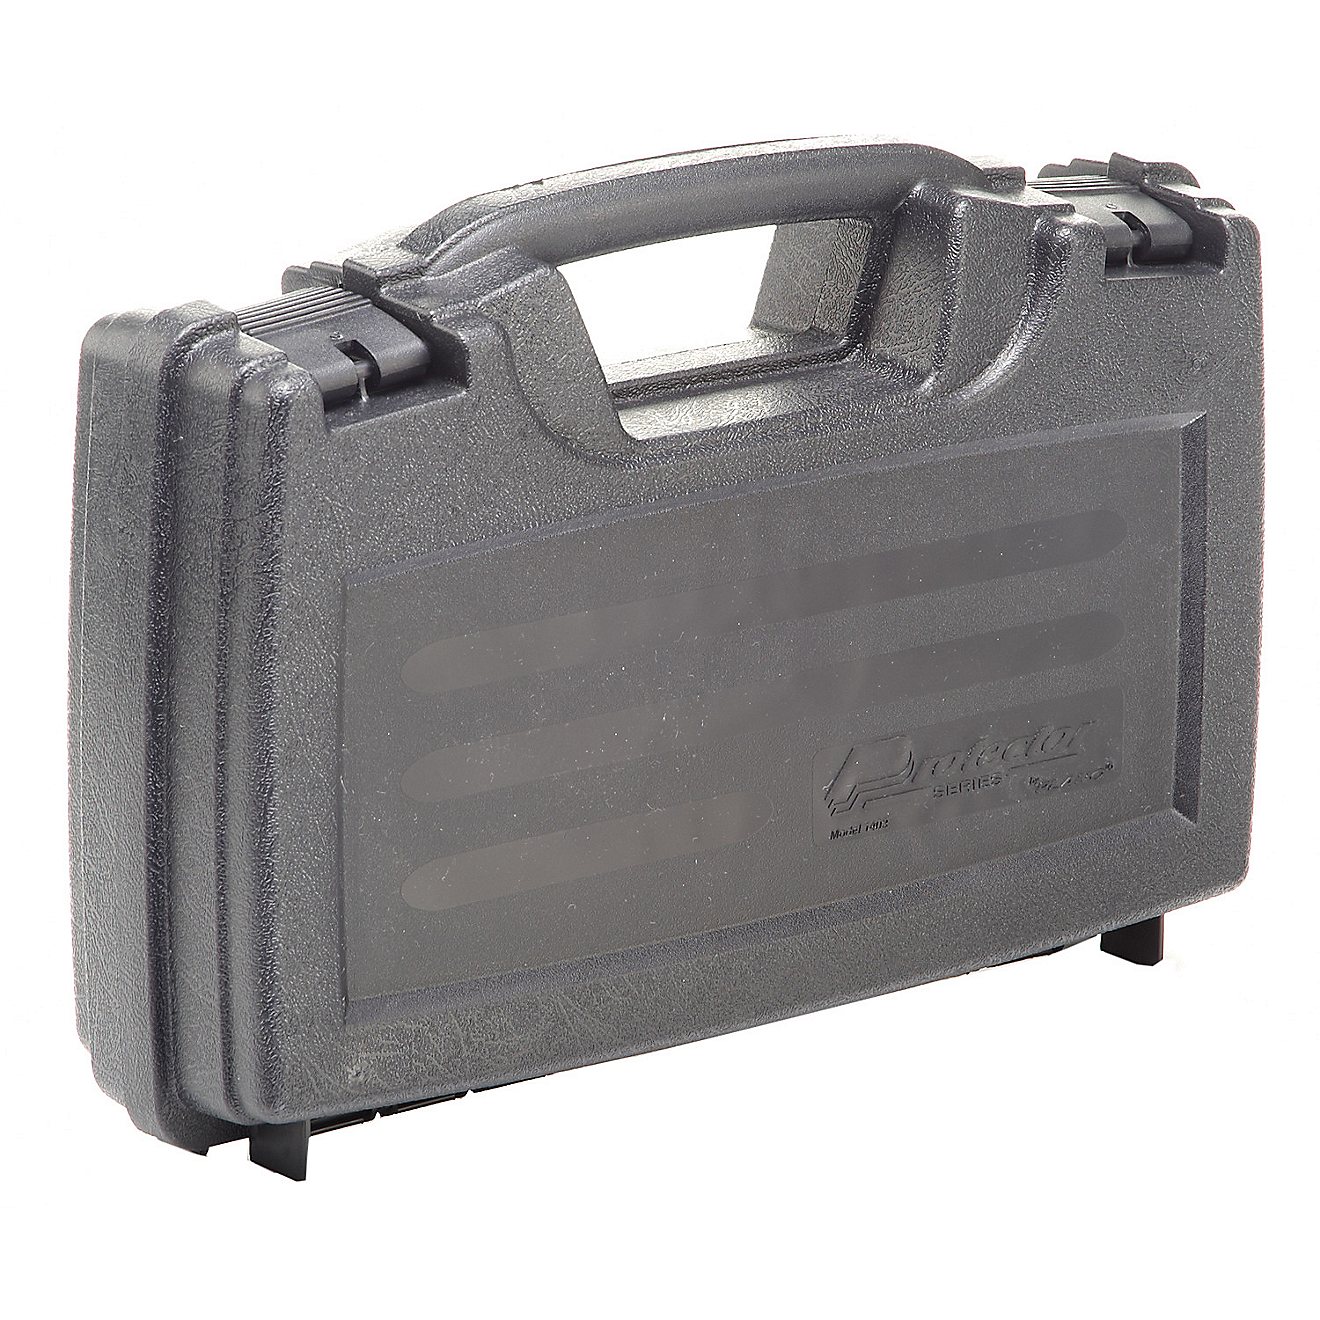 Plano Protector Single Pistol Case                                                                                               - view number 1